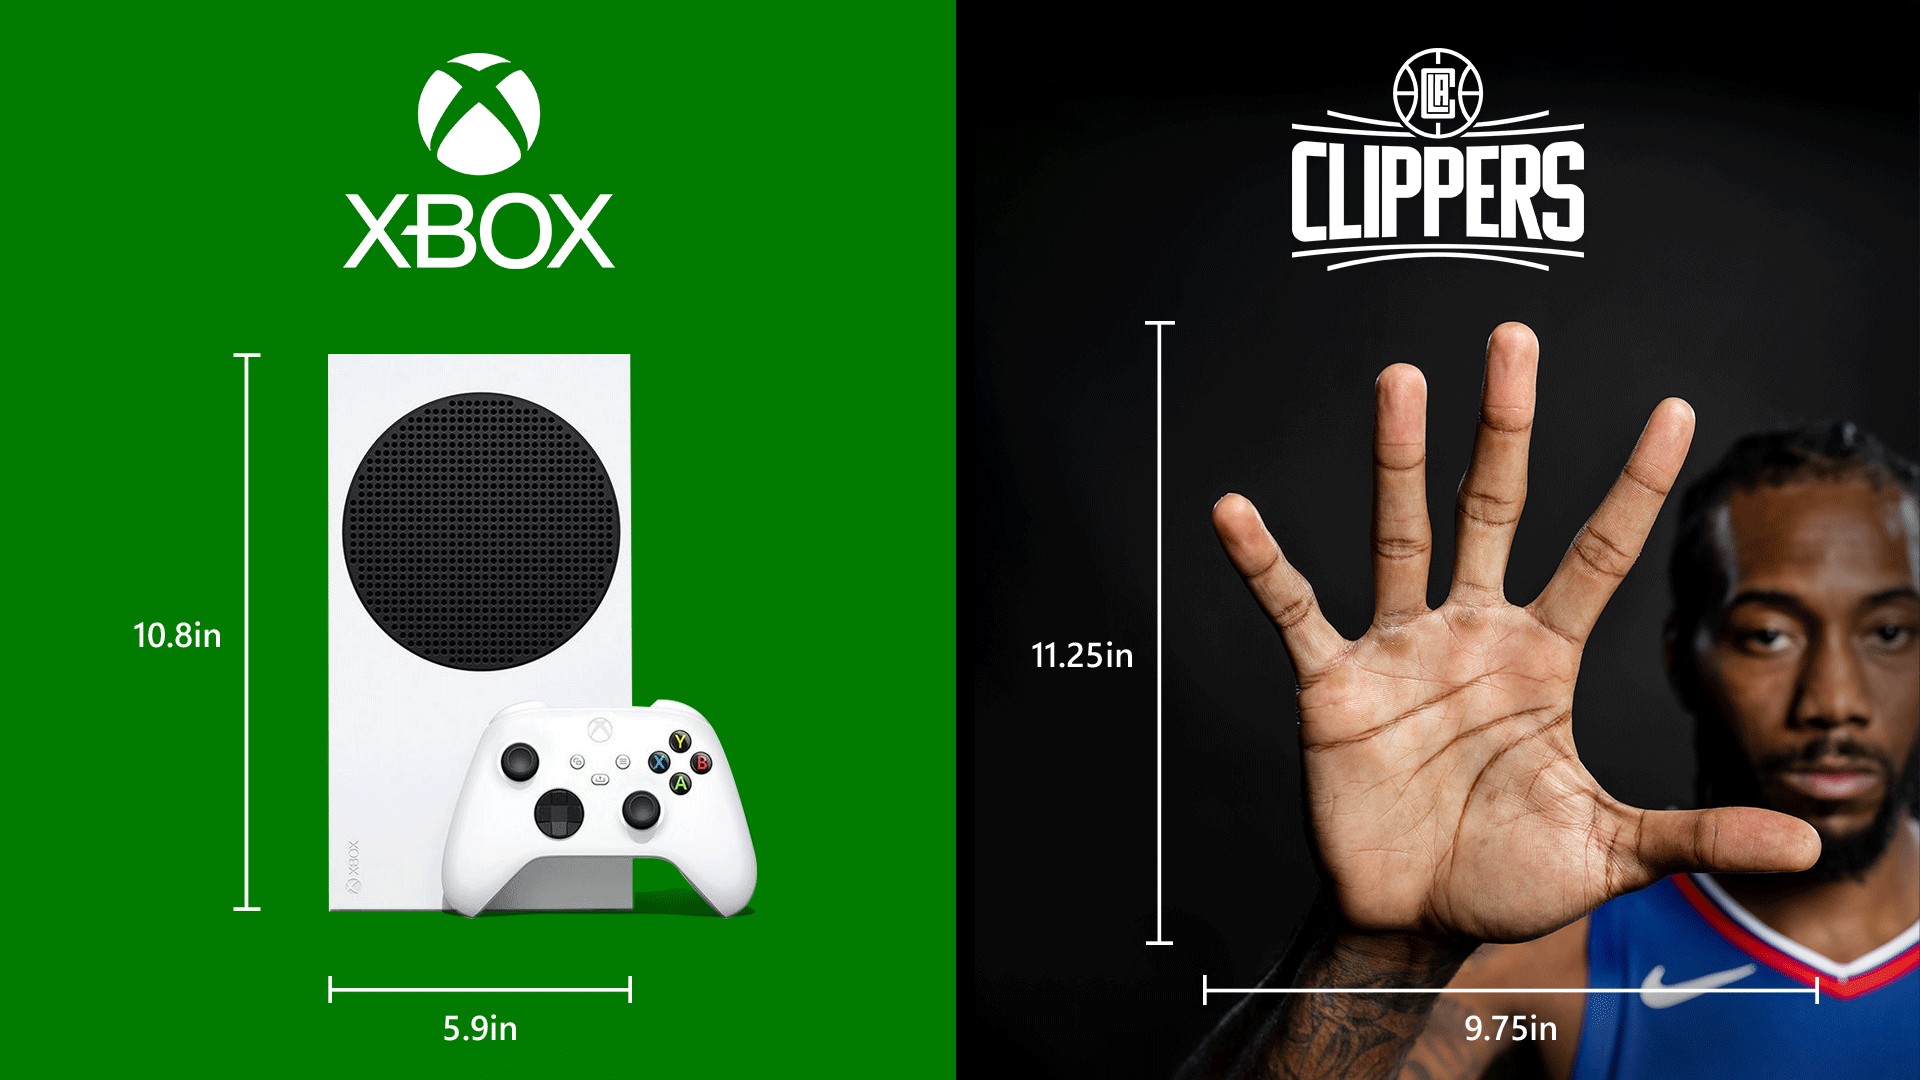 The Xbox High Five